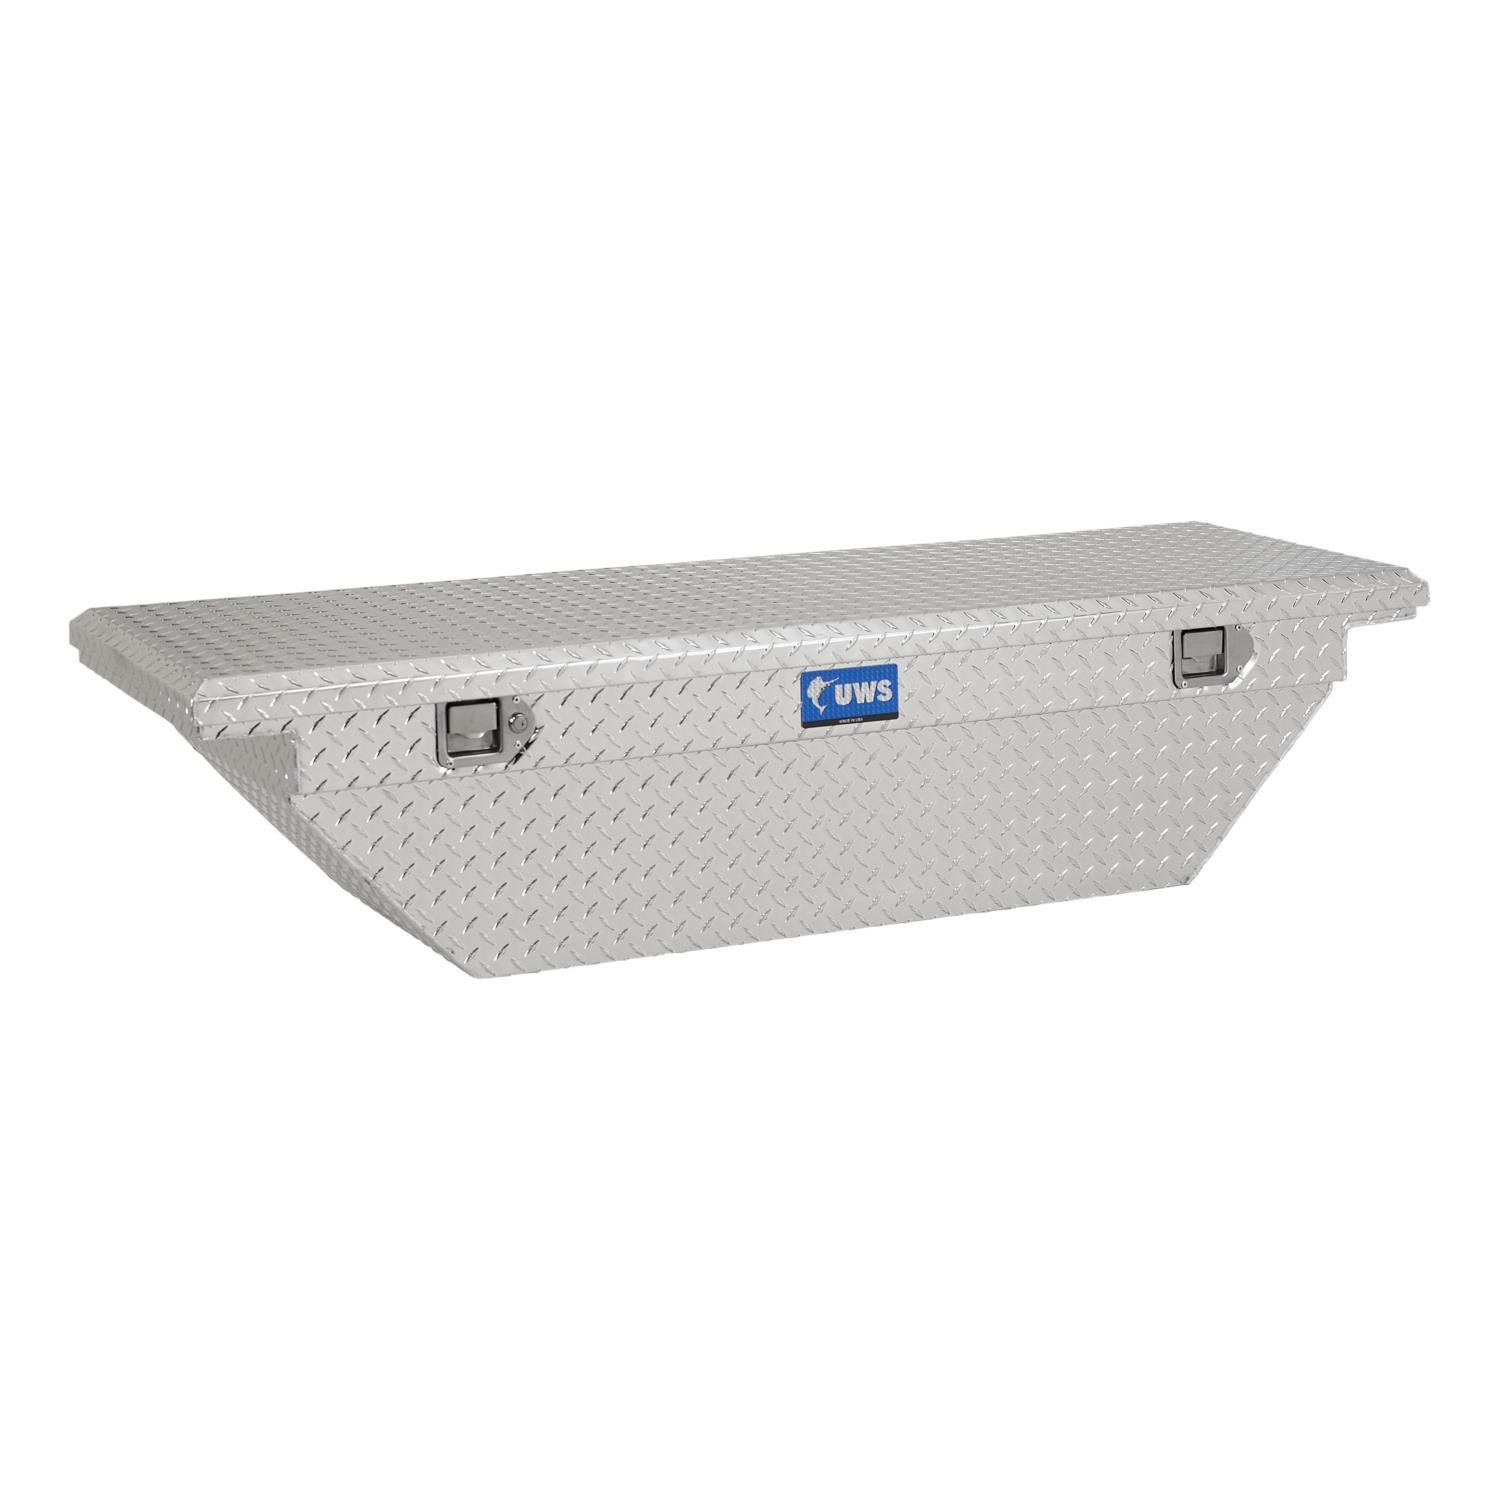 60 in. Angled Crossover Low-Profile Truck Tool Box